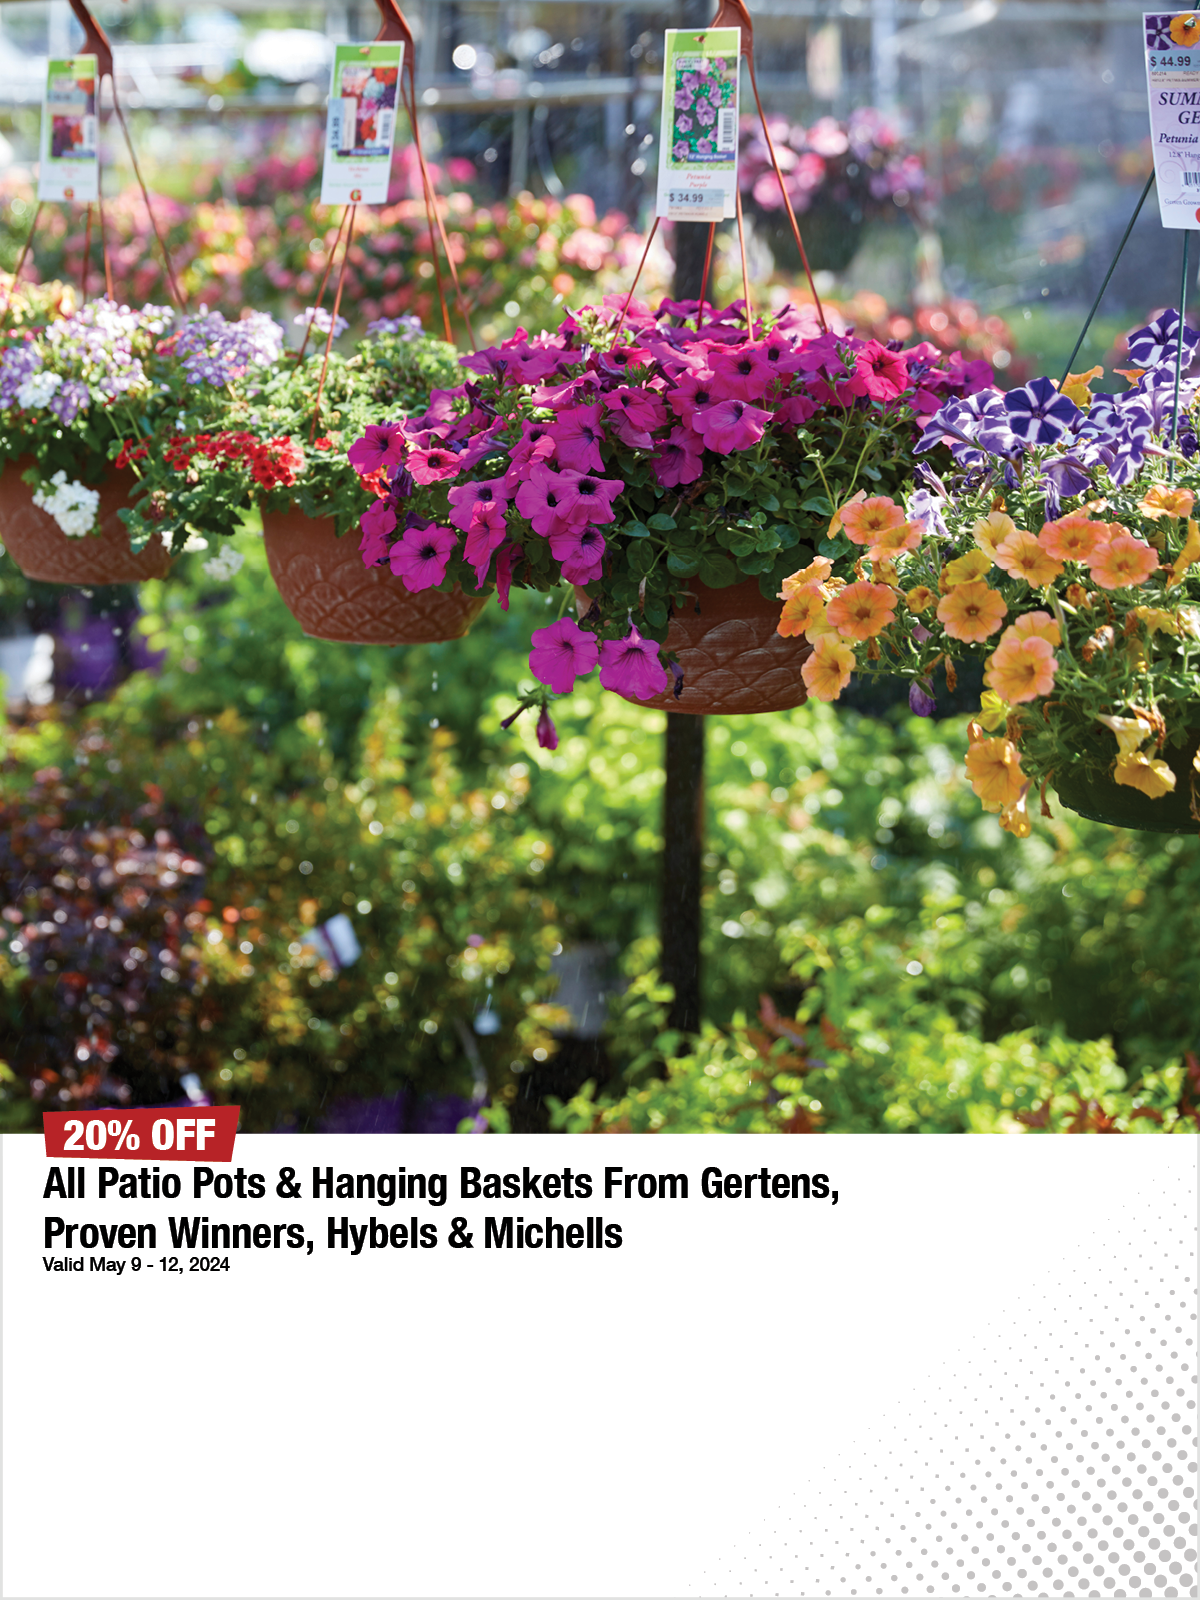 All Patio Pots & Hanging Baskets From Gertens, Proven Winners, Hybels & Michells